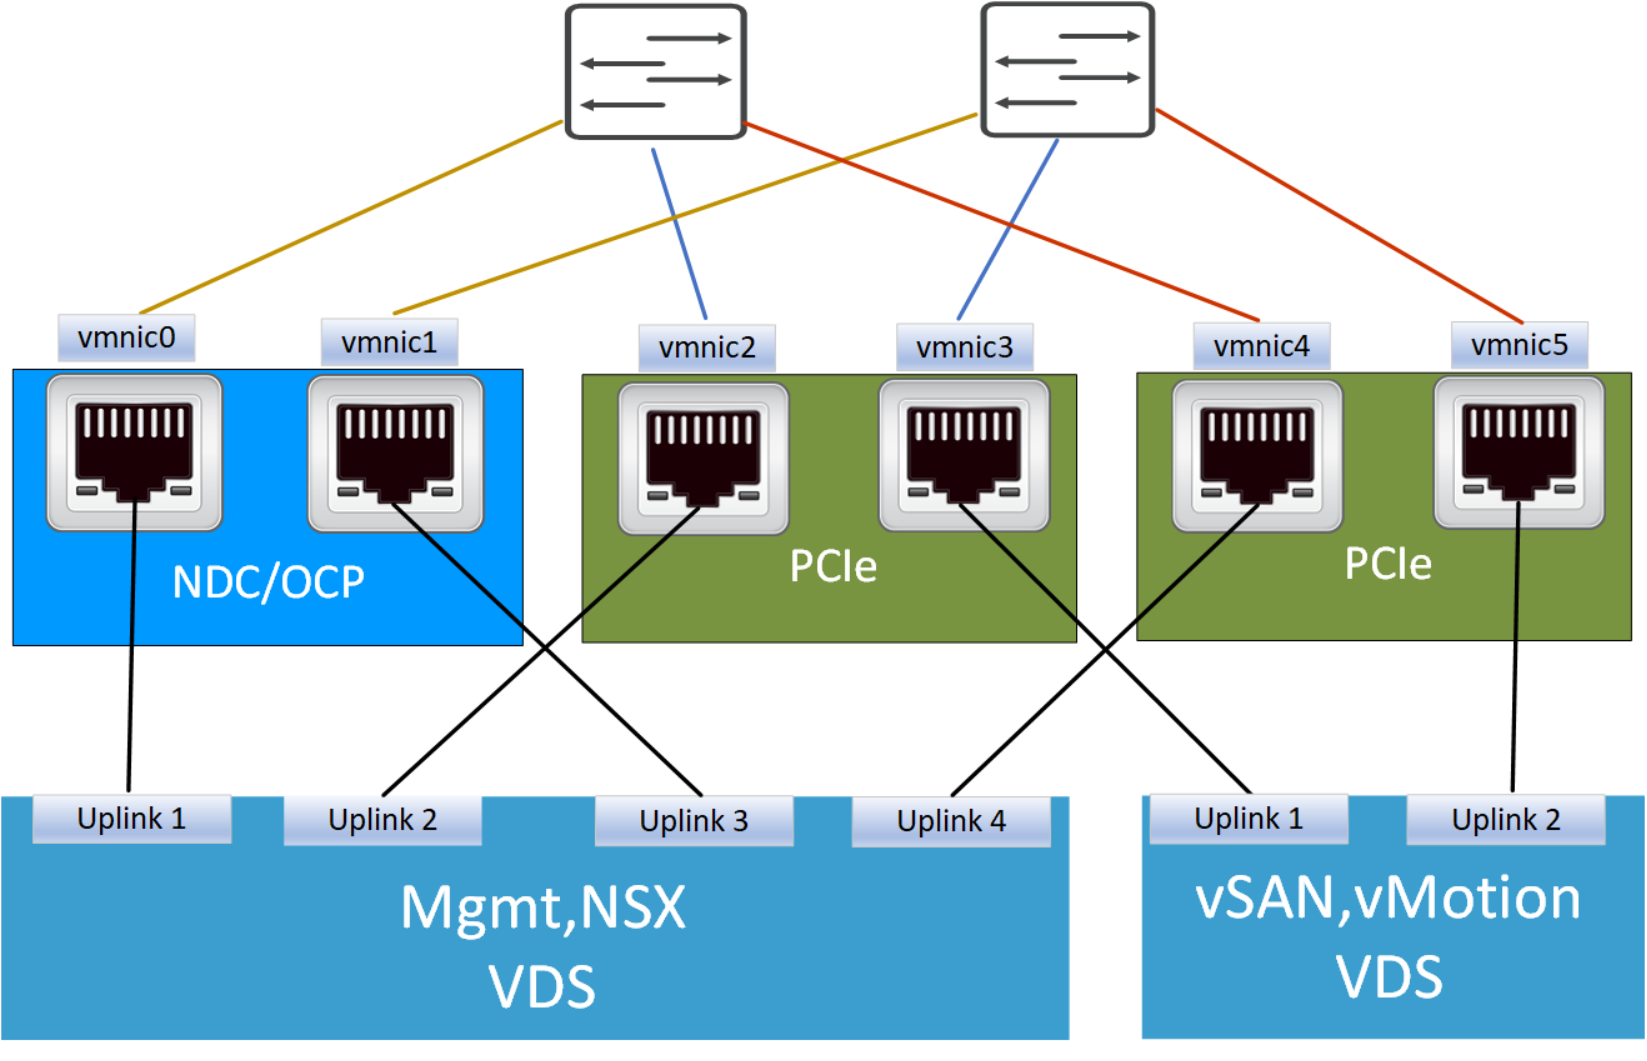 This picture shows connectivity options for VxRail nodes with 6 NICs and 2 VDSs.